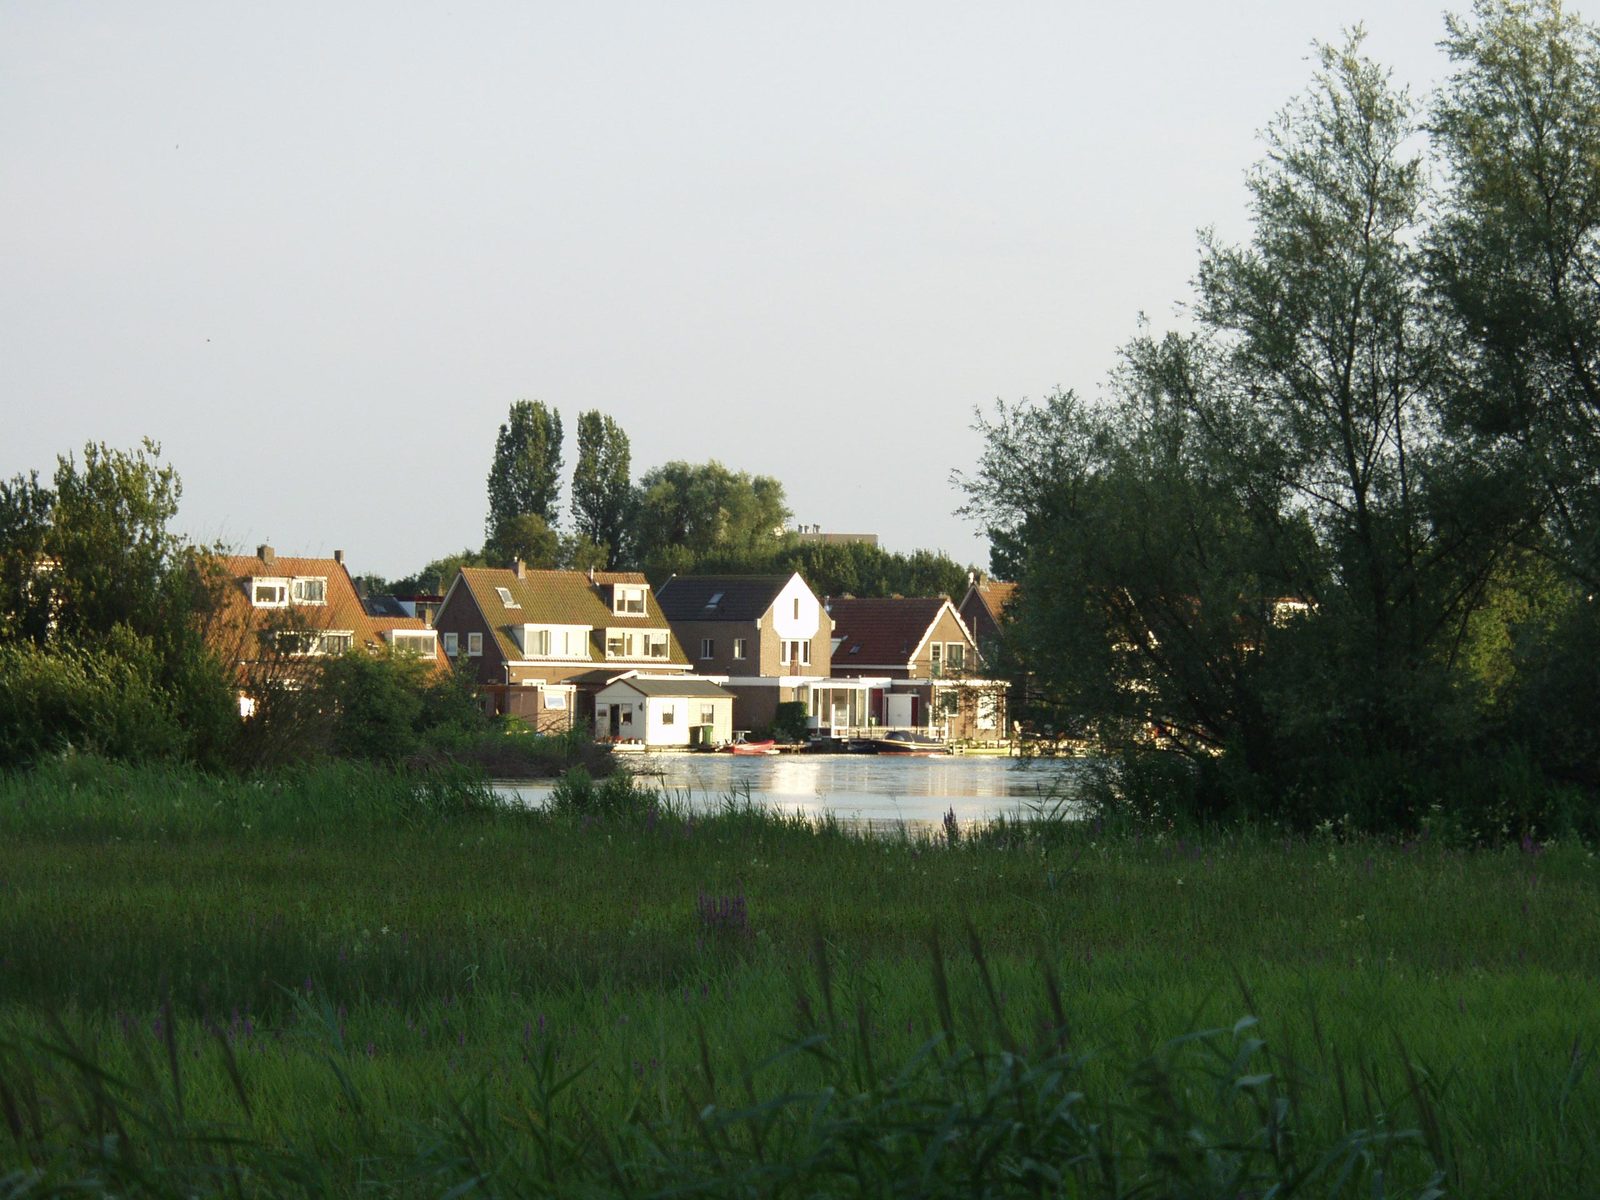 houses in a field next to a body of water